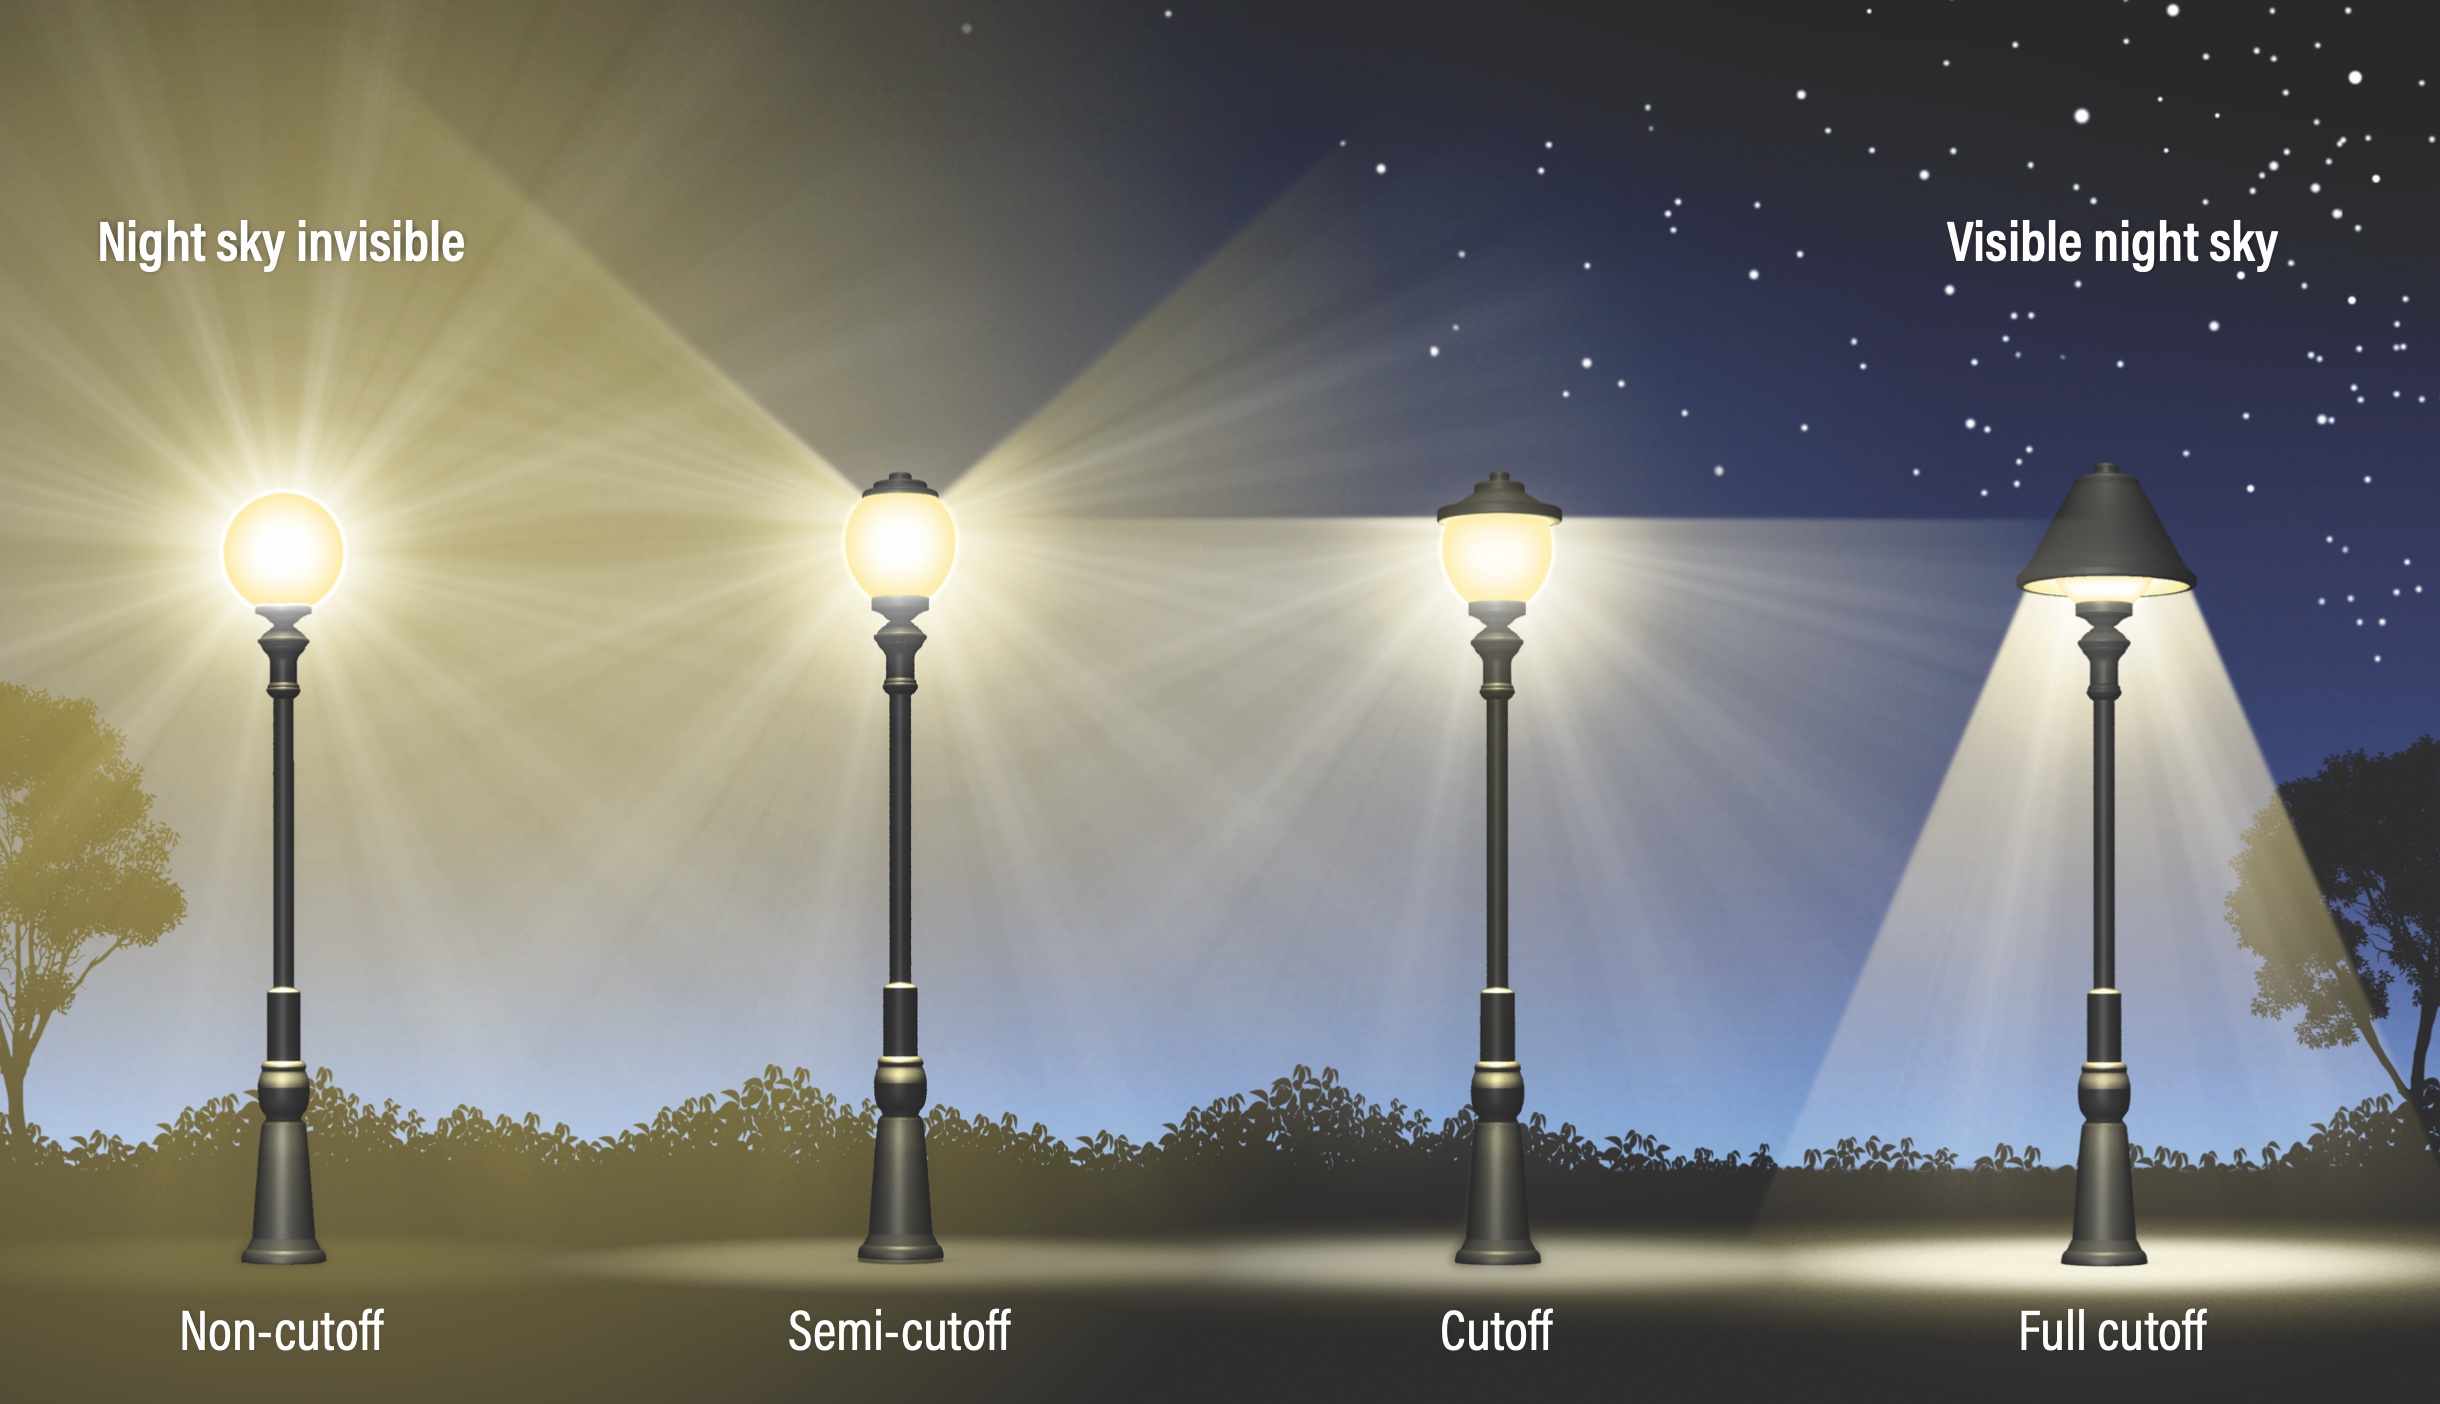 The design of outdoor lighting plays a huge role in the amount — or lack — of light pollution produced. Non-cutoff lights have no shielding and spray photons in all directions, while those with progressively more shielding (semi-cutoff, cutoff) reduce the amount of wasted light not pointed at the ground. Lights with a full cutoff design are best — these eliminate any light at or above an angle of 90° from the pole and focus their full intensity downward for the greatest efficiency and protection of the night sky. 